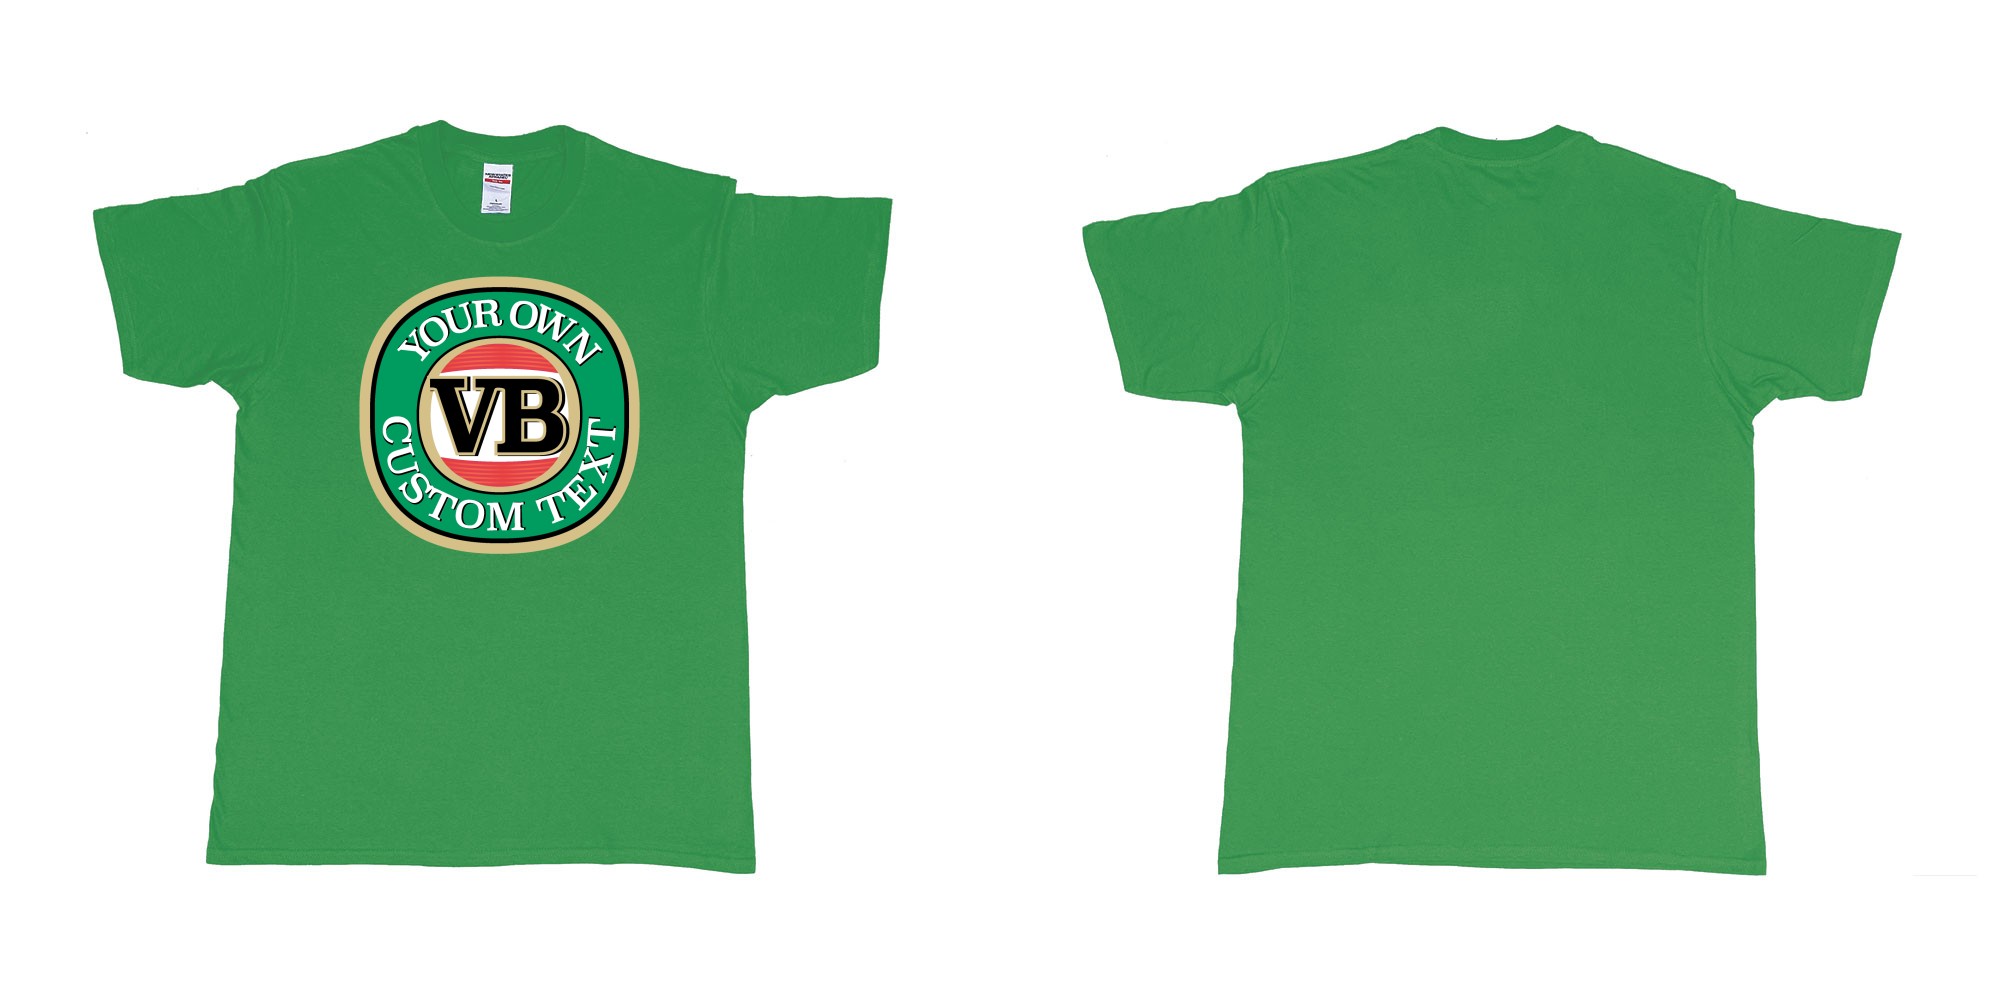 Custom tshirt design vb victoria bitter beer brand logo in fabric color irish-green choice your own text made in Bali by The Pirate Way